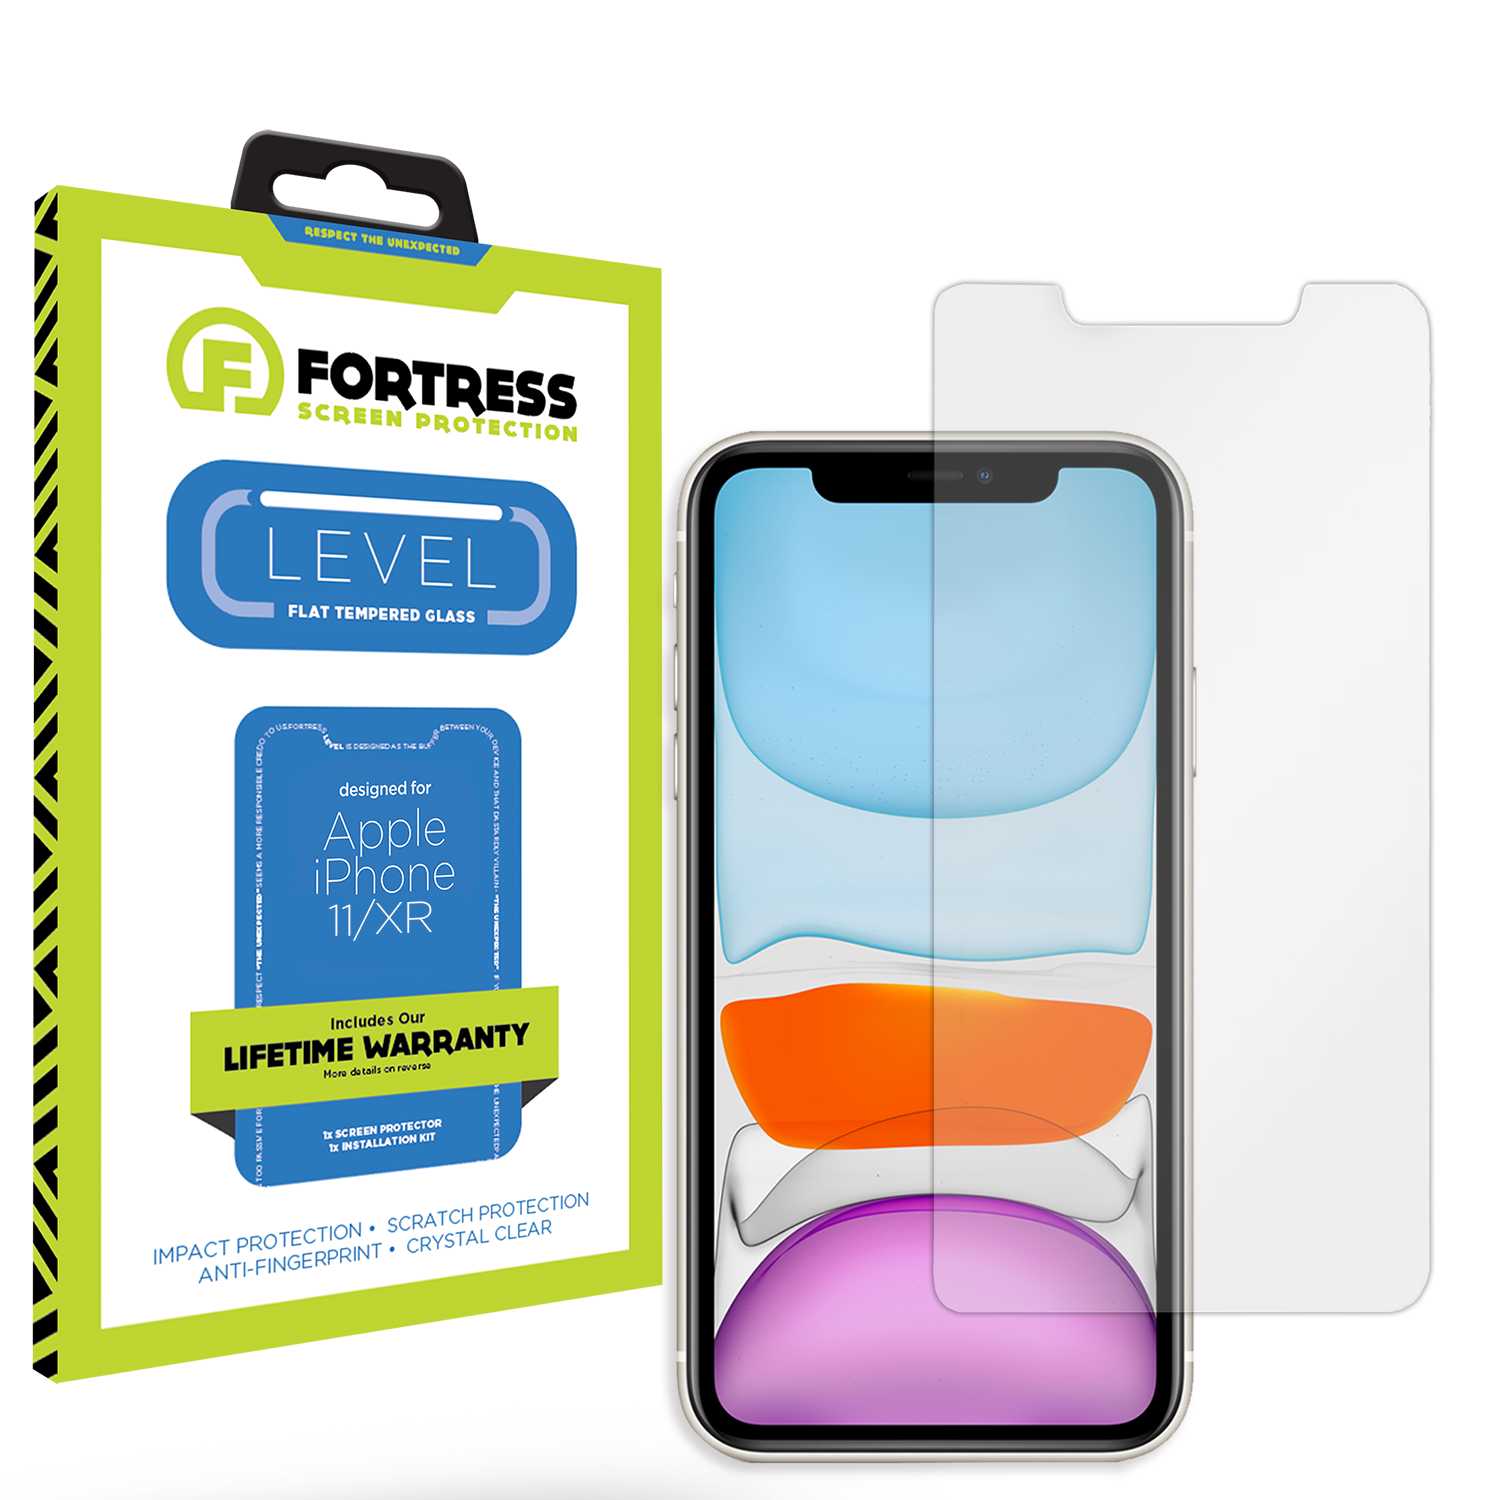 Fortress iPhone 11 Screen Protector $0Coverage Scooch Screen Protector